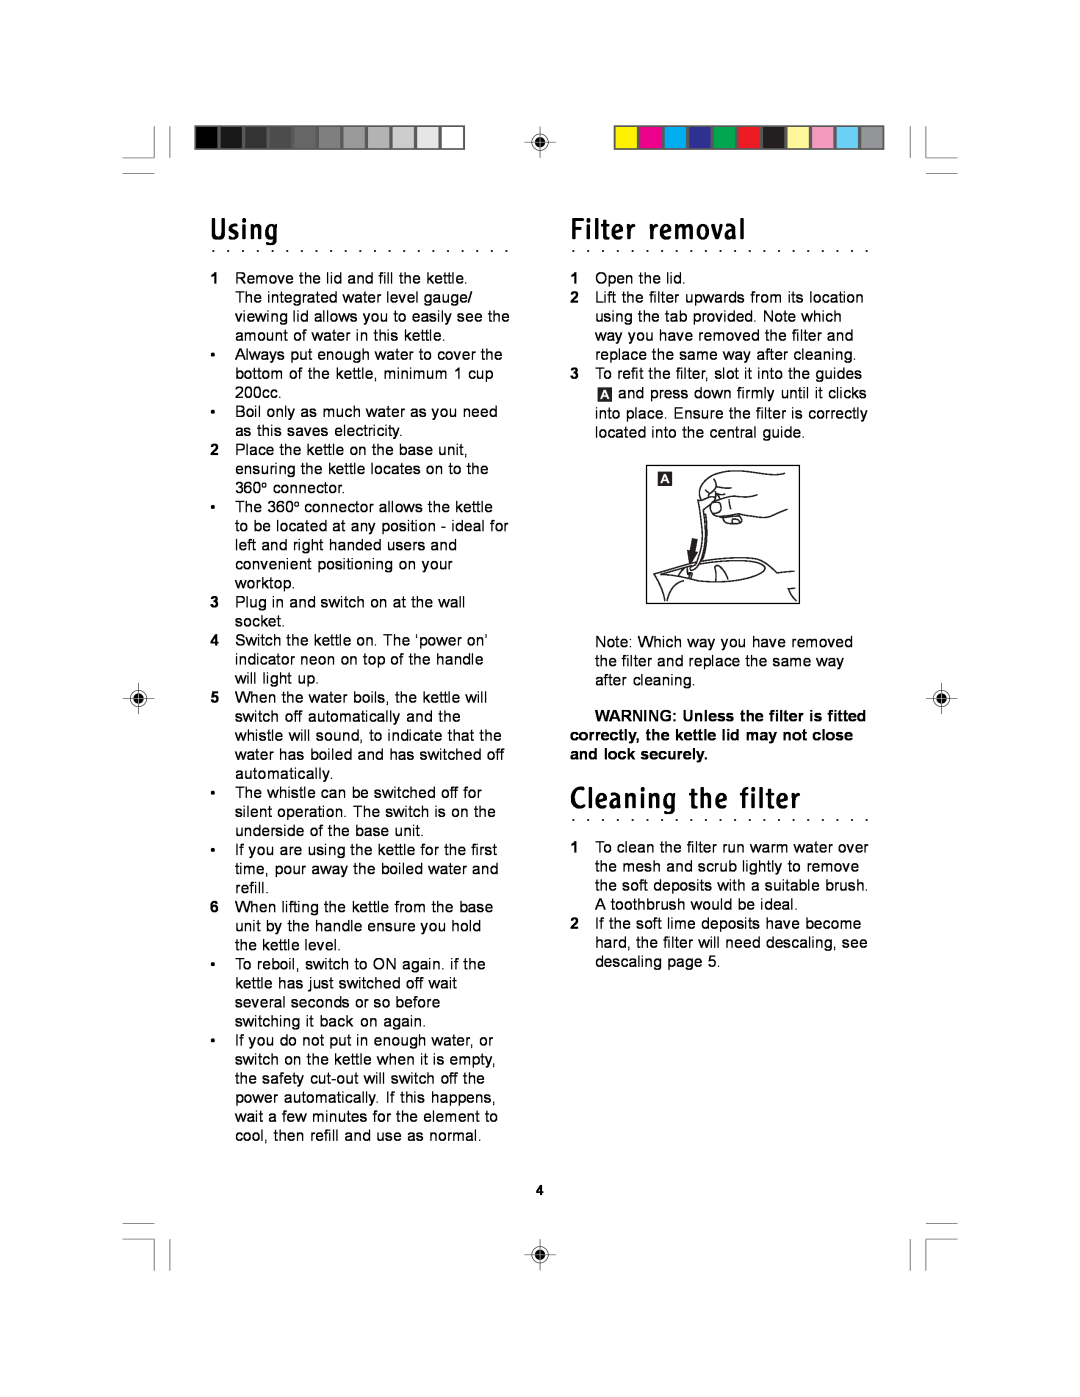 Morphy Richards Soprano kettle manual Using, Filter removal, Cleaning the filter 